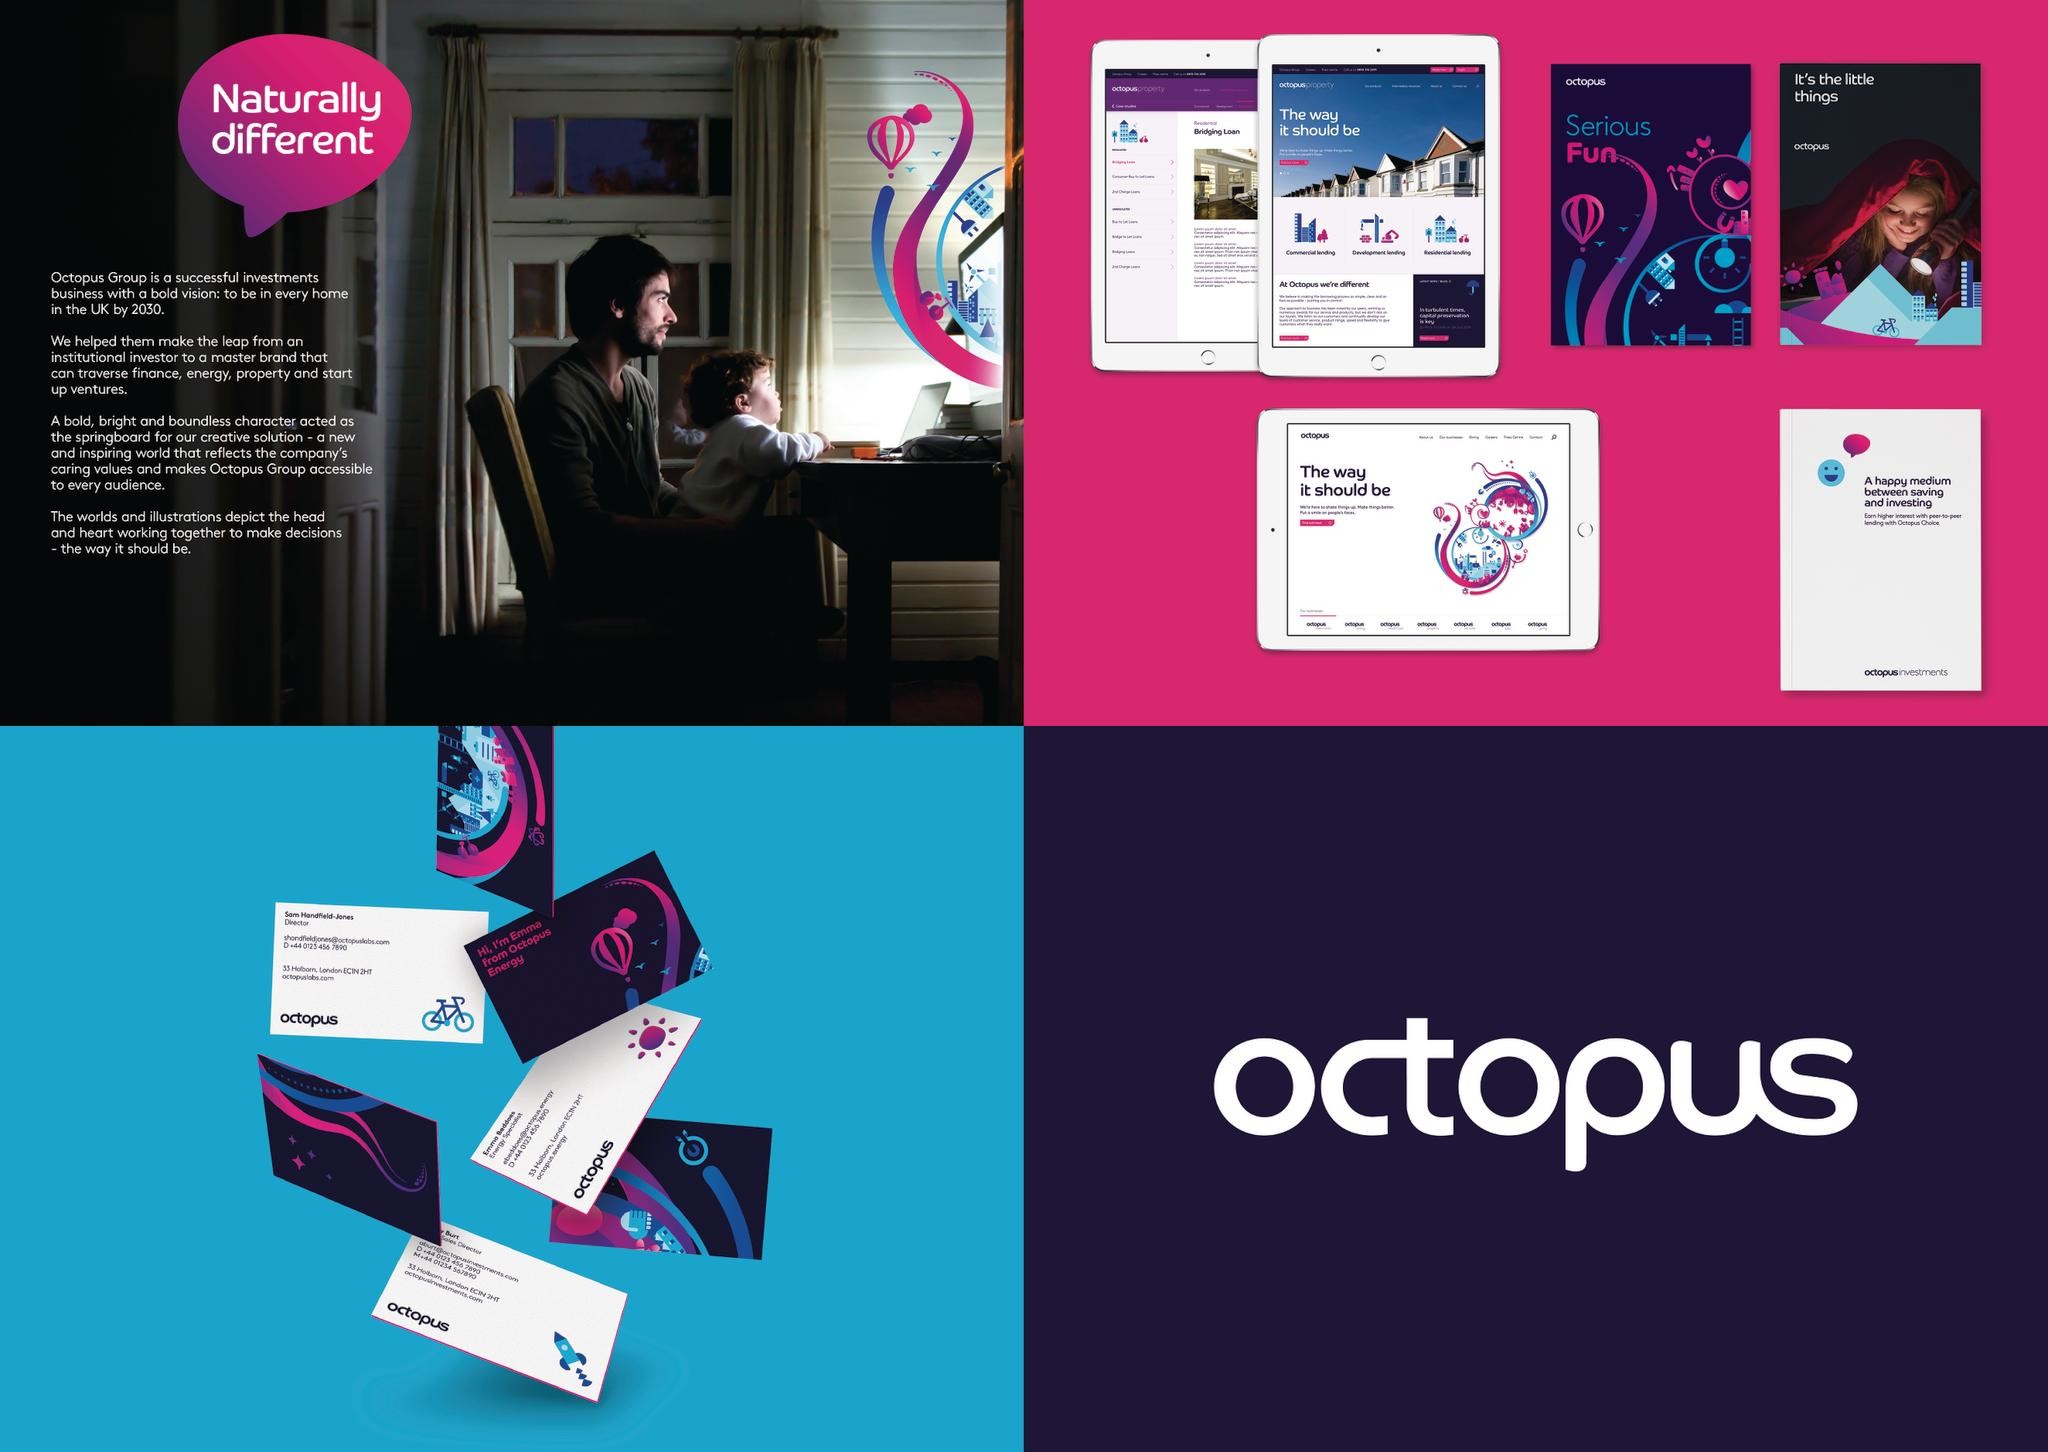 A REBRAND FOR THE UK'S BOLDEST INVESTMENT COMPANY | OCTOPUS GROUP